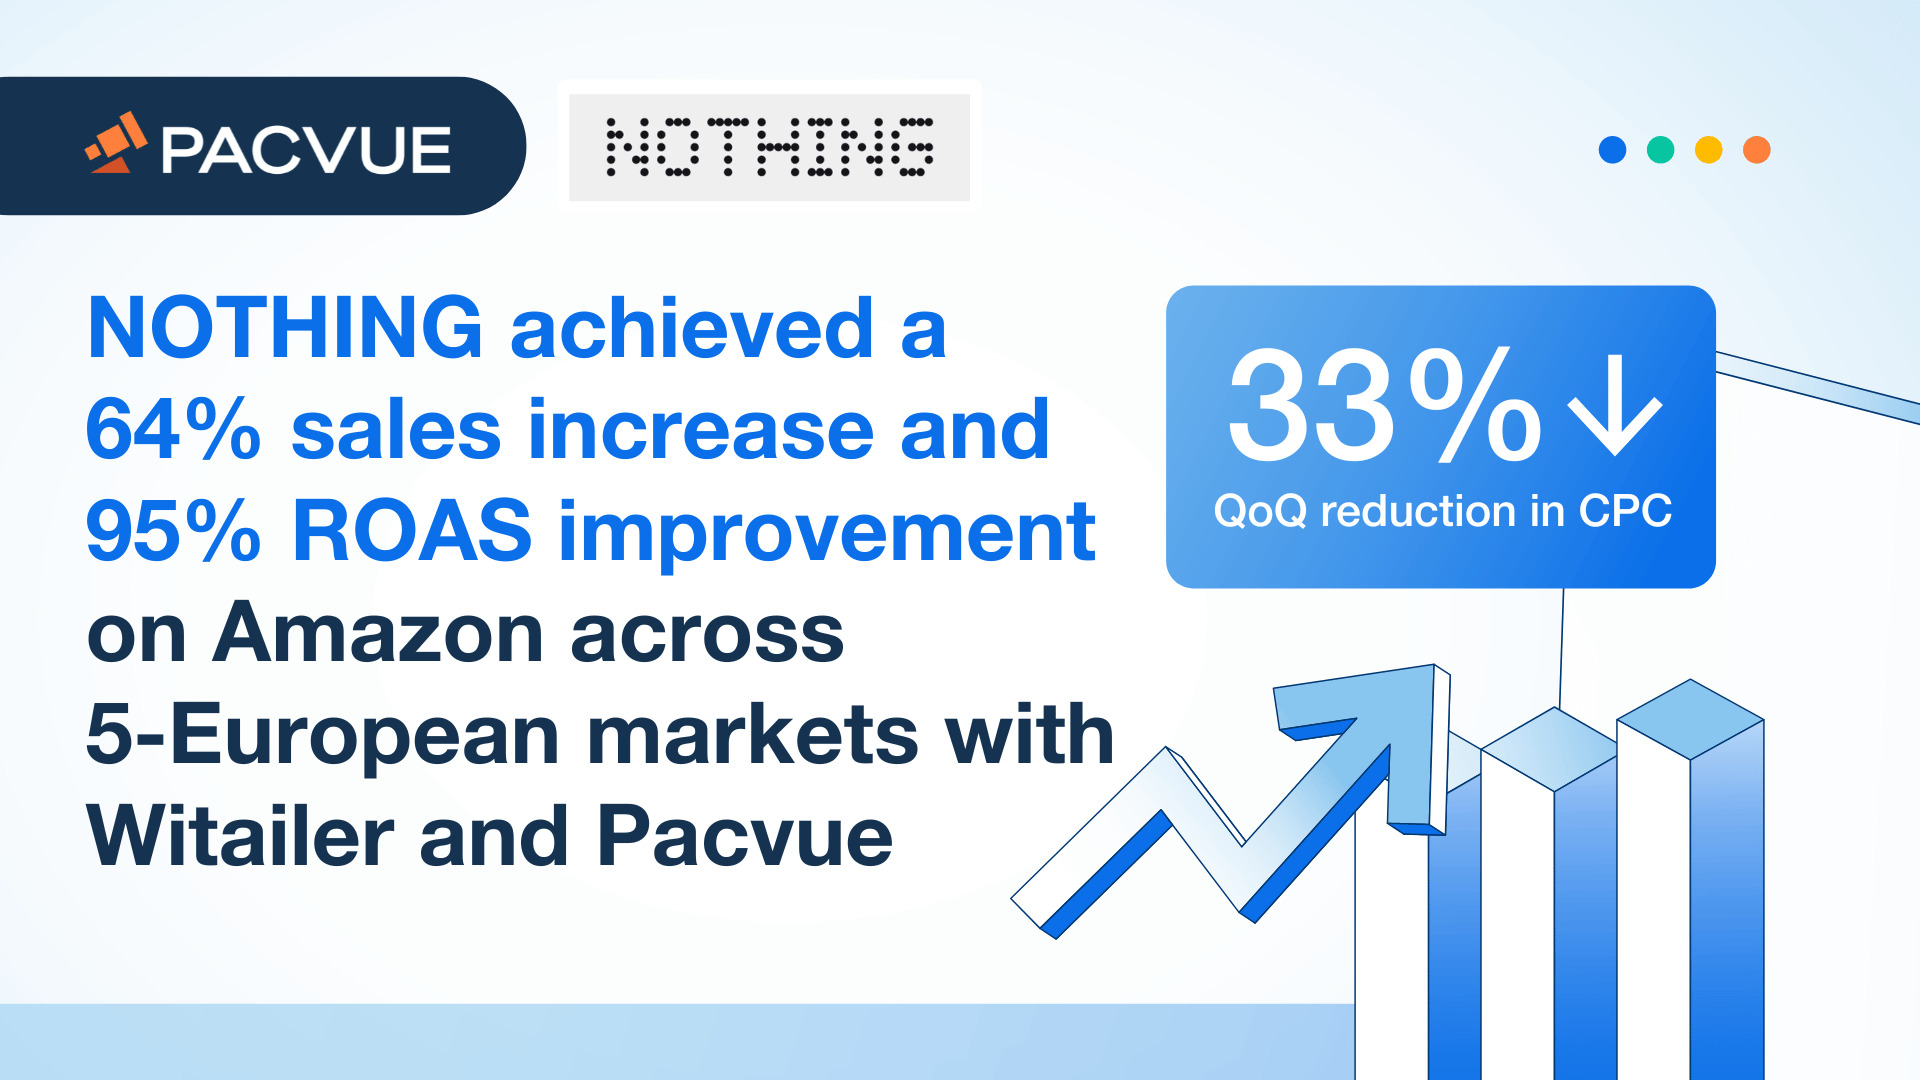 NOTHING achieved a 64% sales increase and 95% ROAS improvement on Amazon across 5-European markets with Witailer and Pacvue